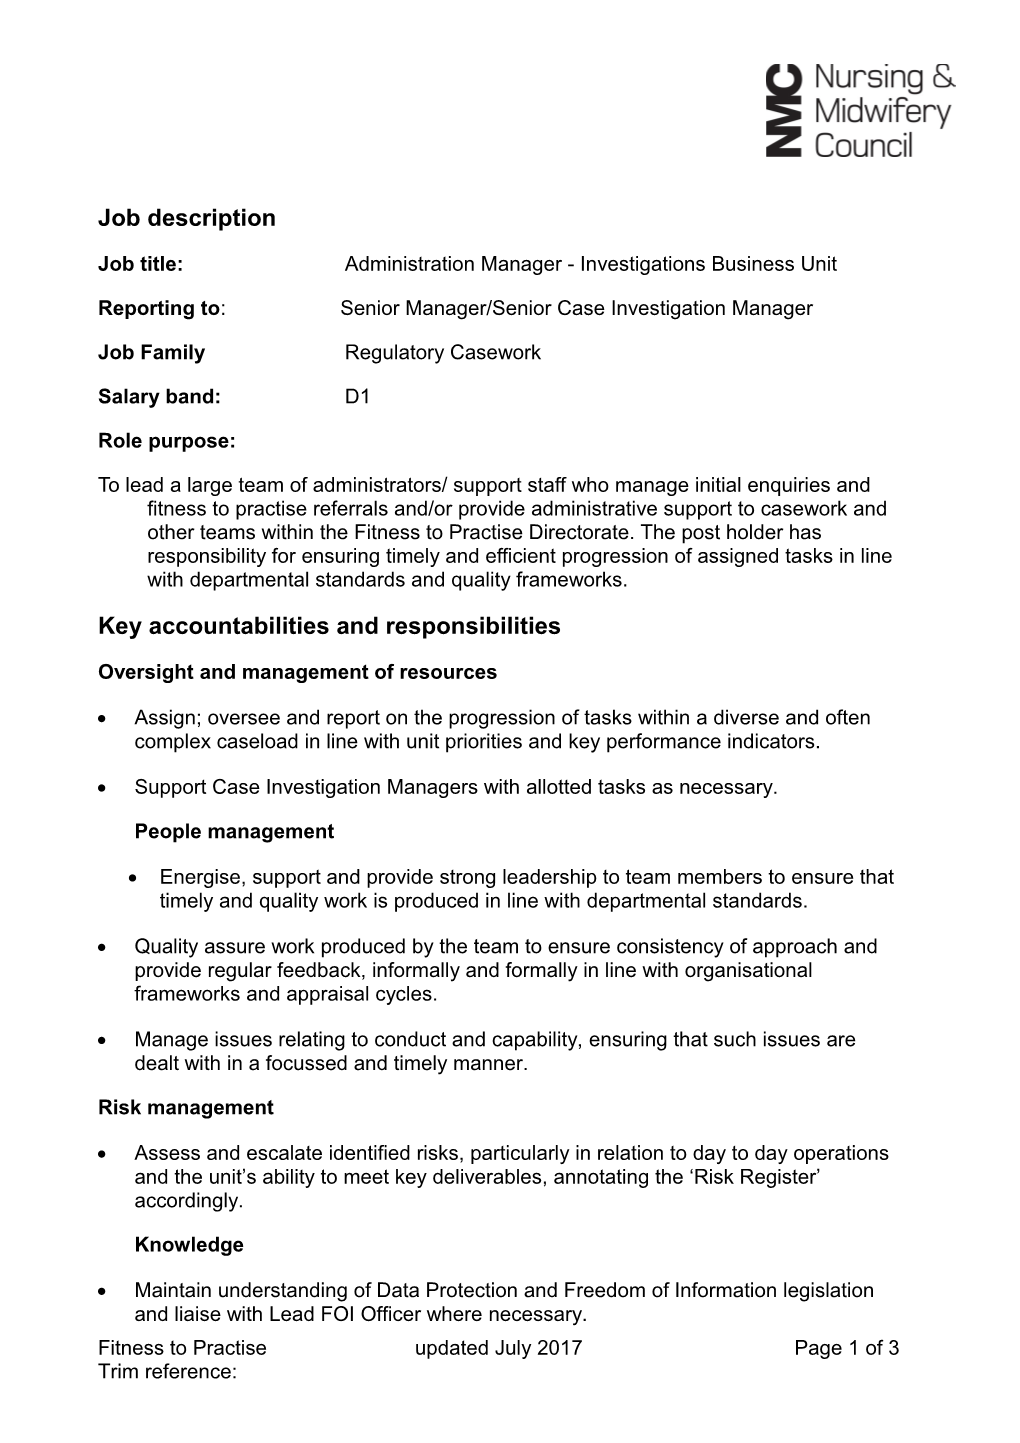 Job Title: Administration Manager - Investigations Business Unit